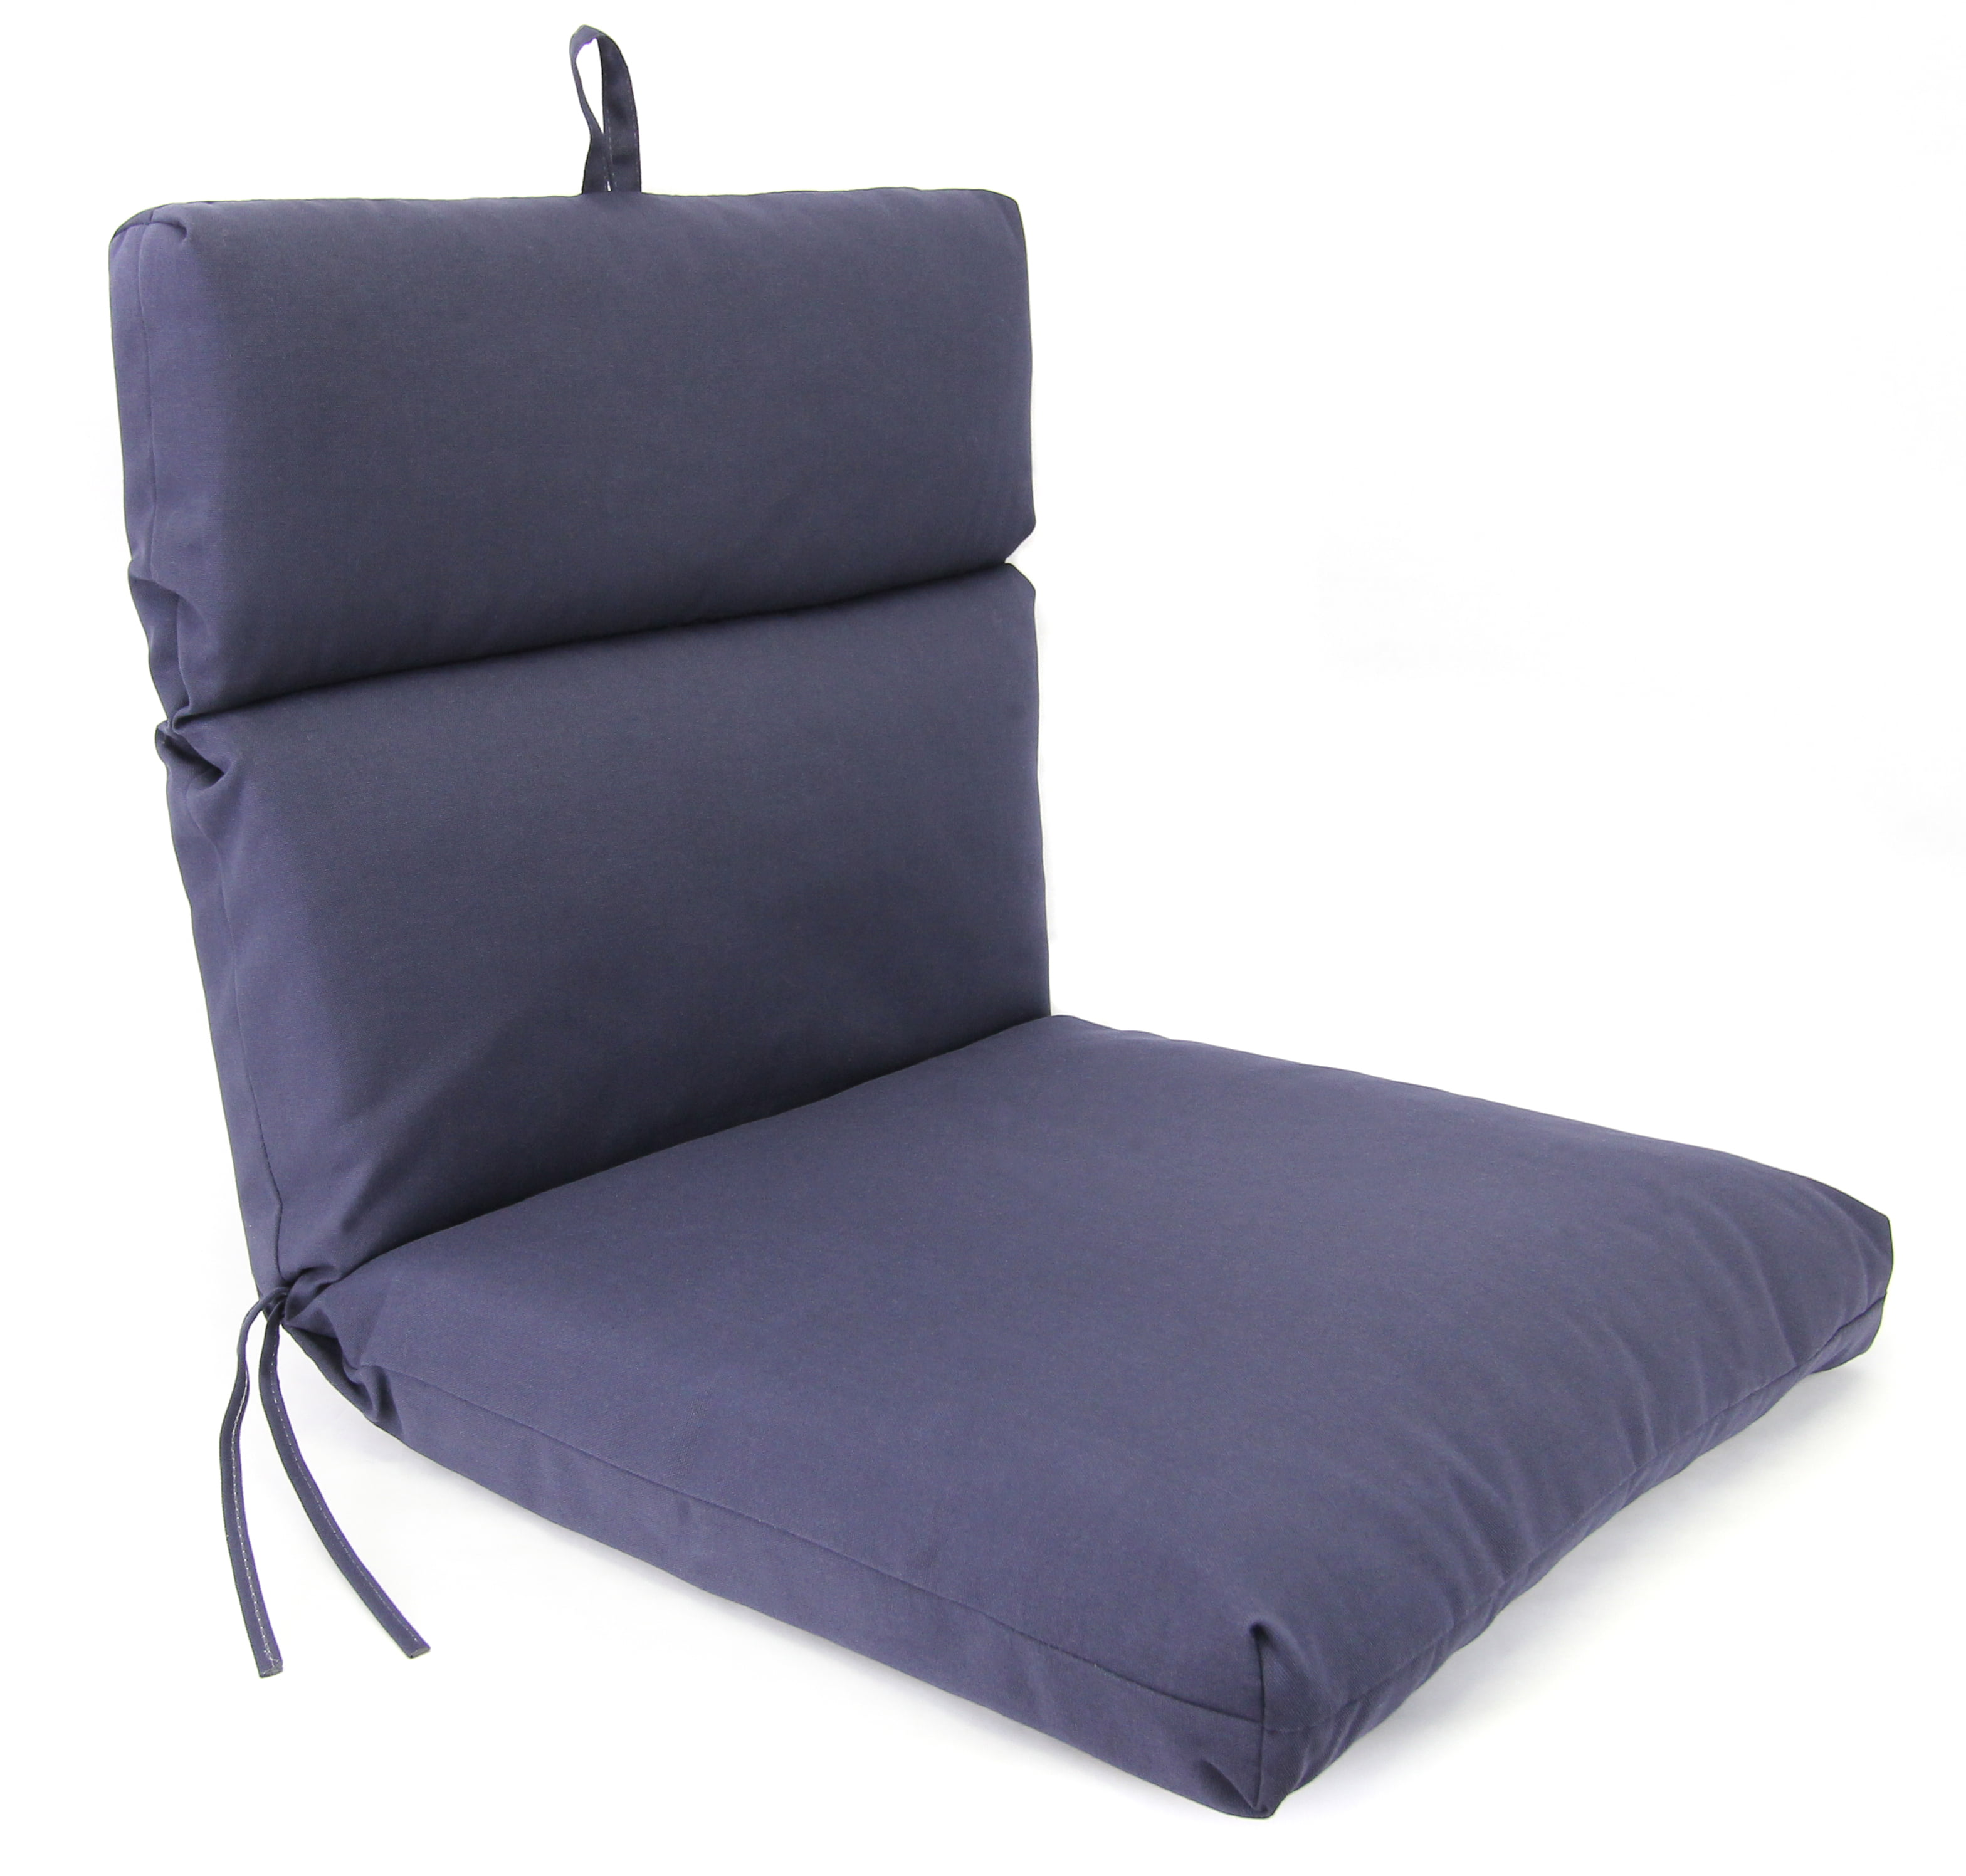 Unique Office Chair Cushion Kmart for Large Space